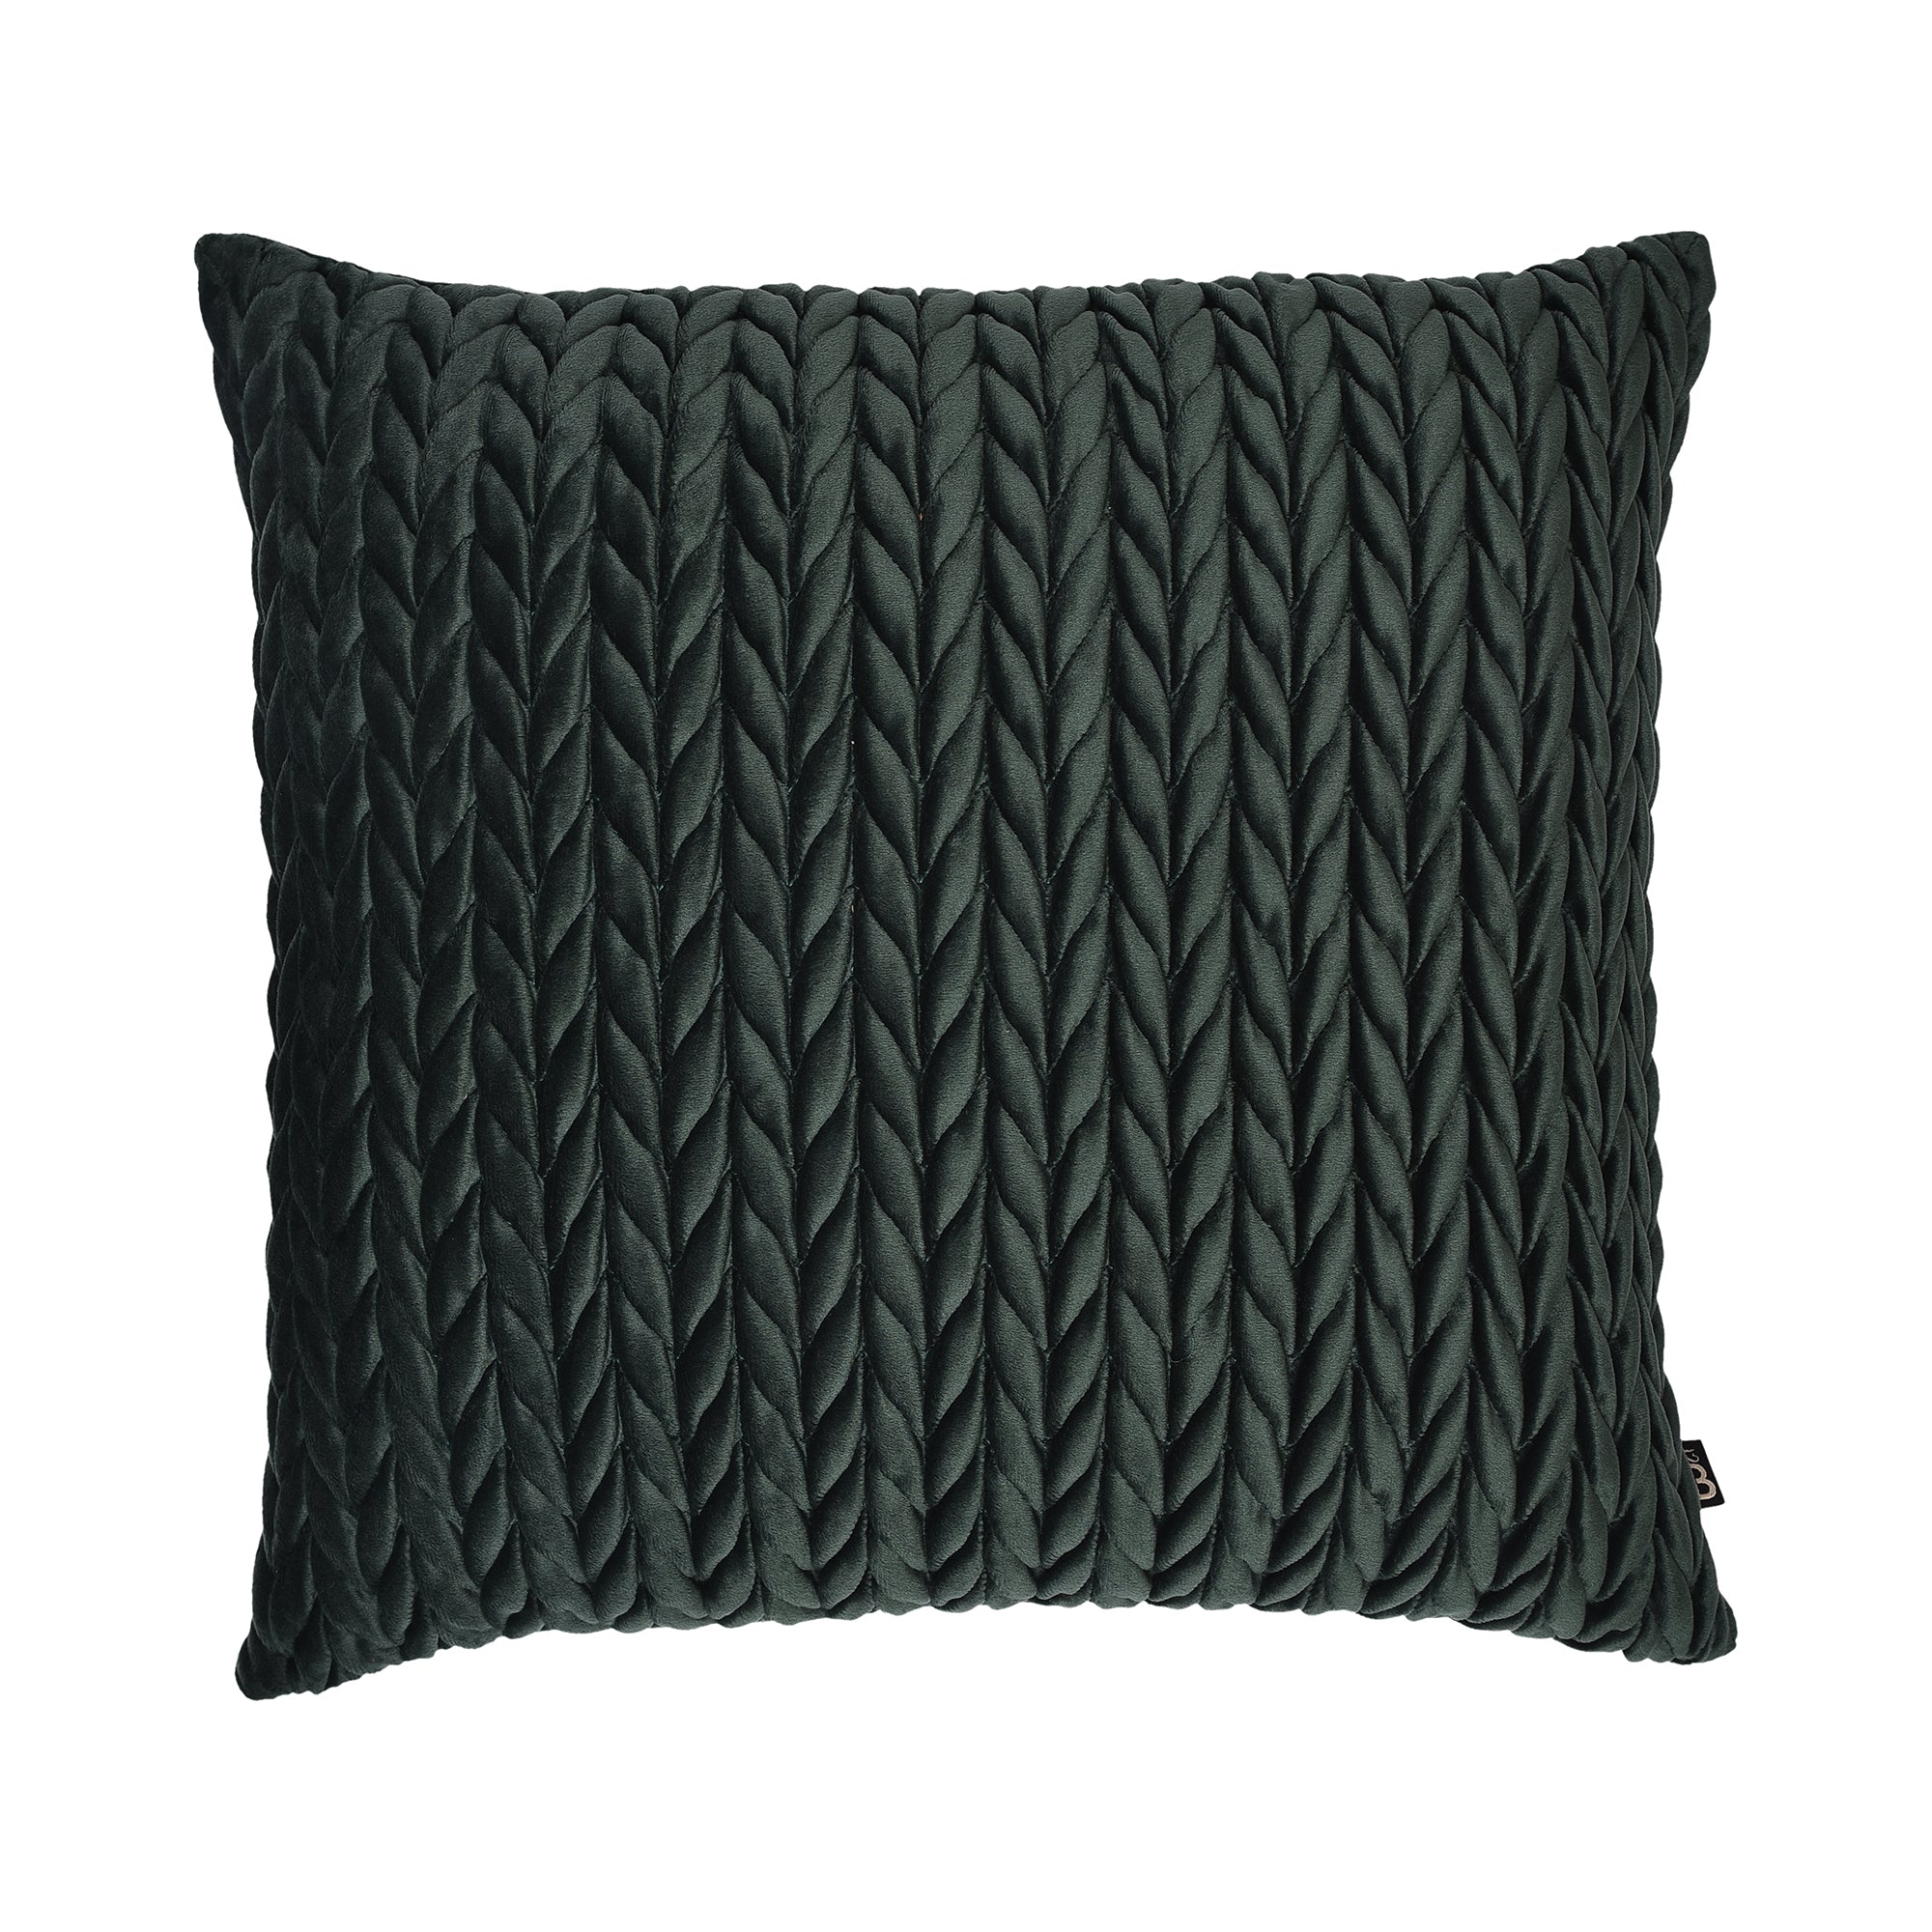 Cushion Cover Amory by Laurence Llewelyn-Bowen in Bottle Green